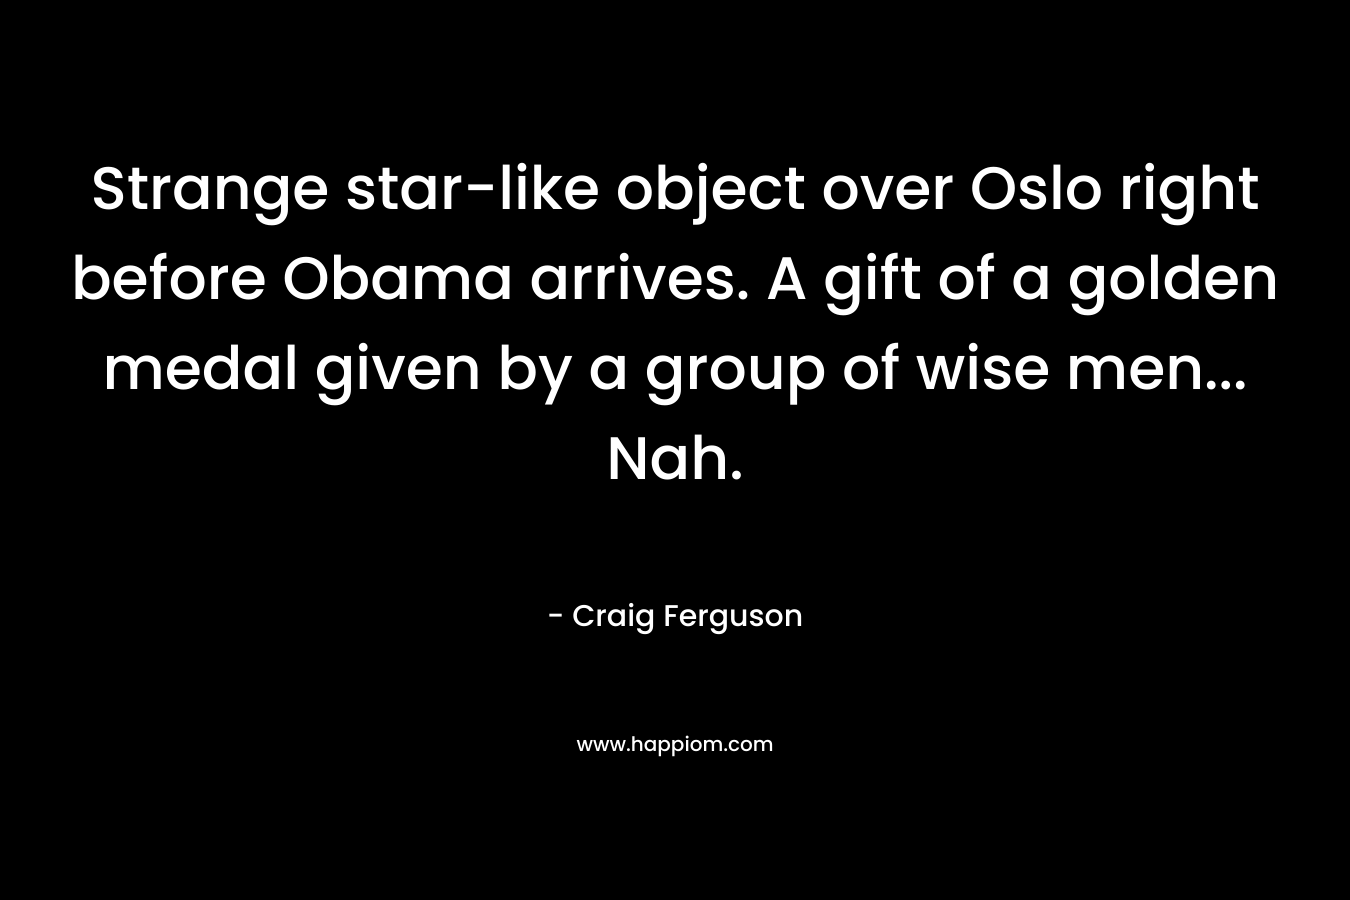 Strange star-like object over Oslo right before Obama arrives. A gift of a golden medal given by a group of wise men... Nah.